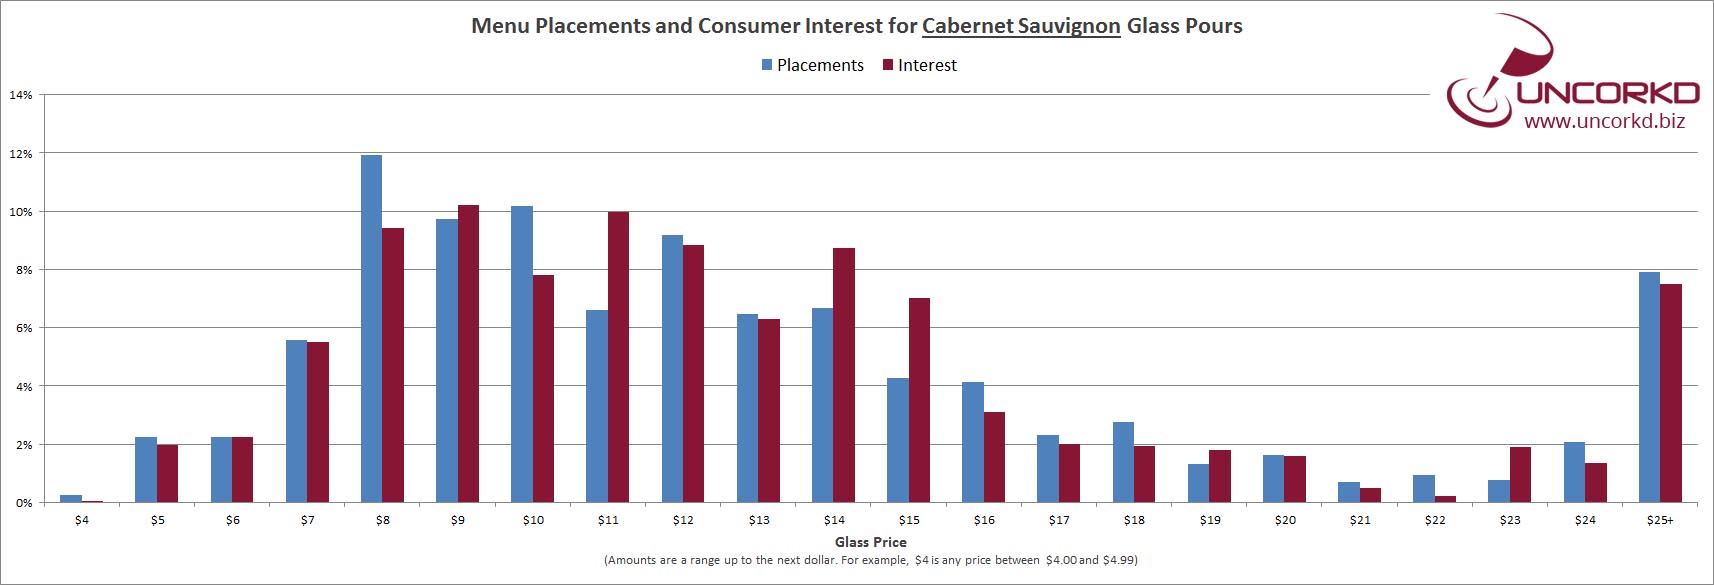 Wine Glass Pricing, Placements and Interest for Cabernet Sauvignon